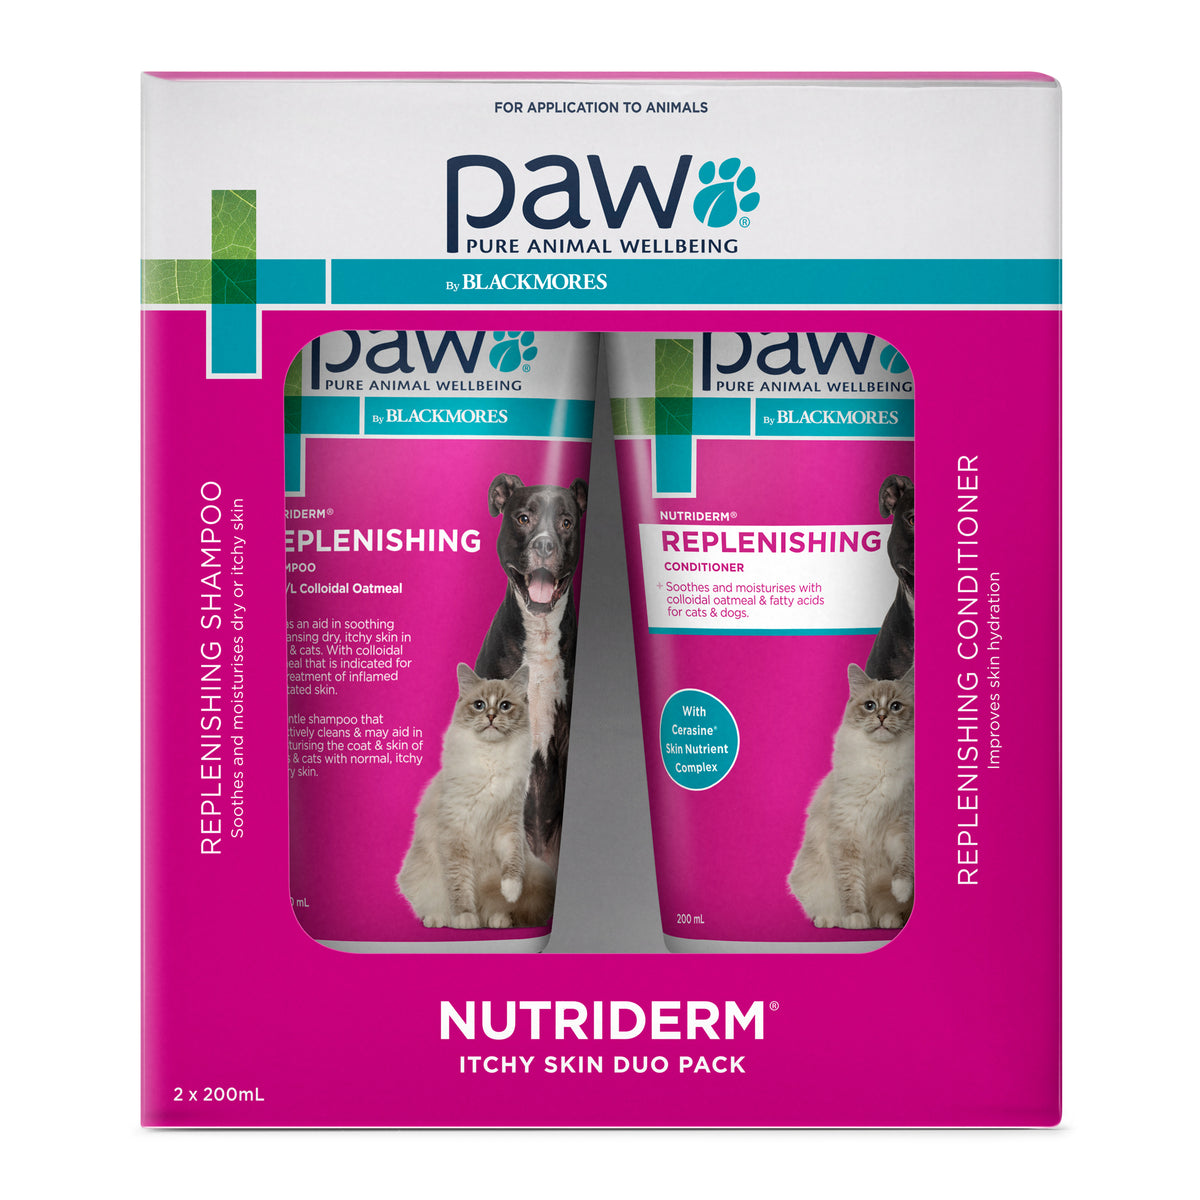 PAW NutriDerm Itchy Skin Duo Pack